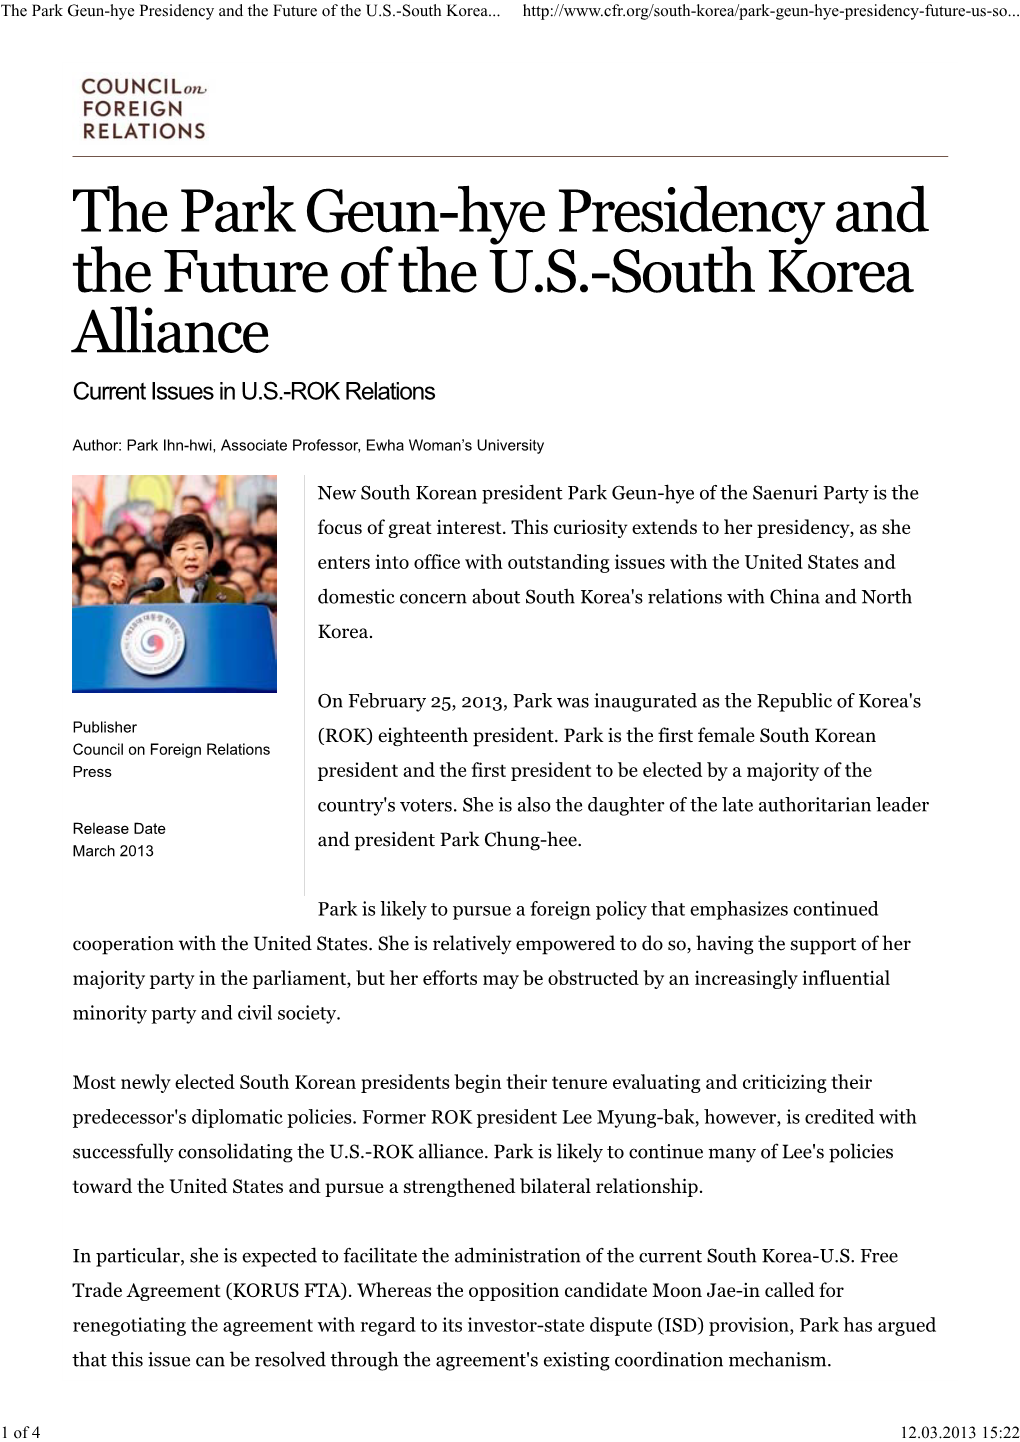 The Park Geun-Hye Presidency and the Future of the US-South Korea